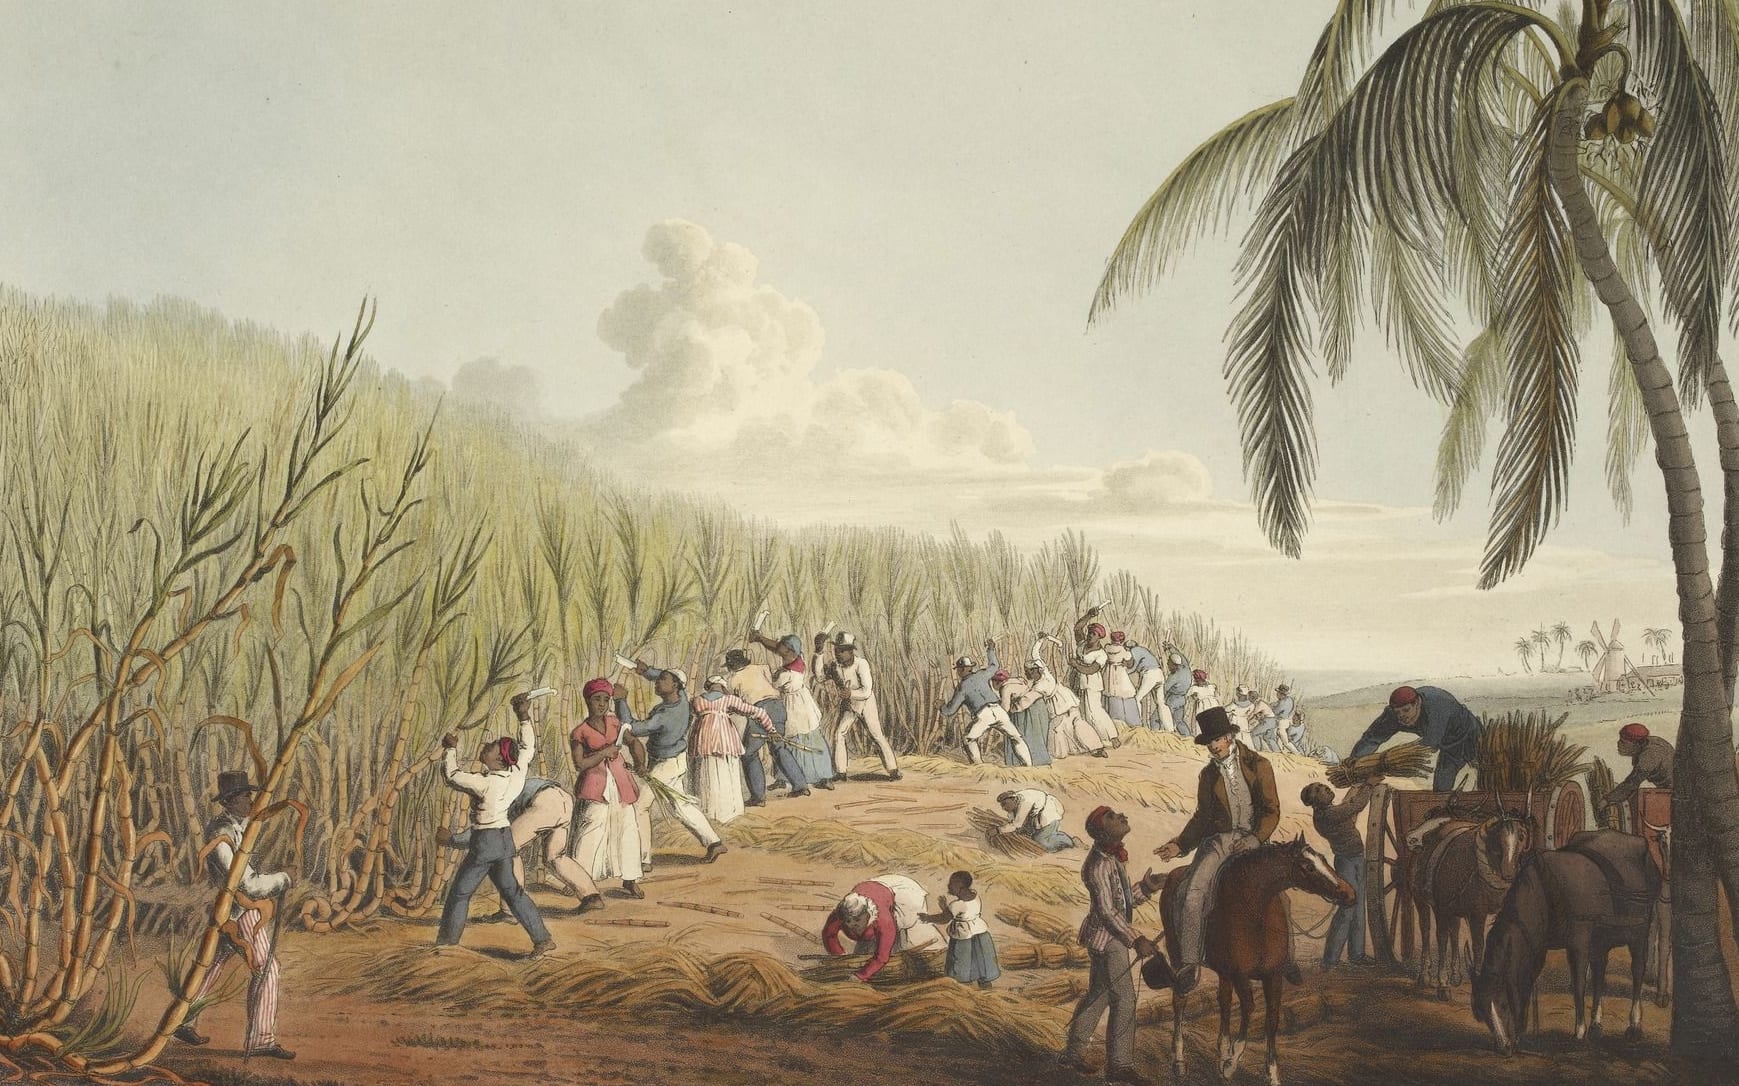 Slaves cut sugar cane on the Caribbean island of Antigua in this 1823 illustration by William Clark.